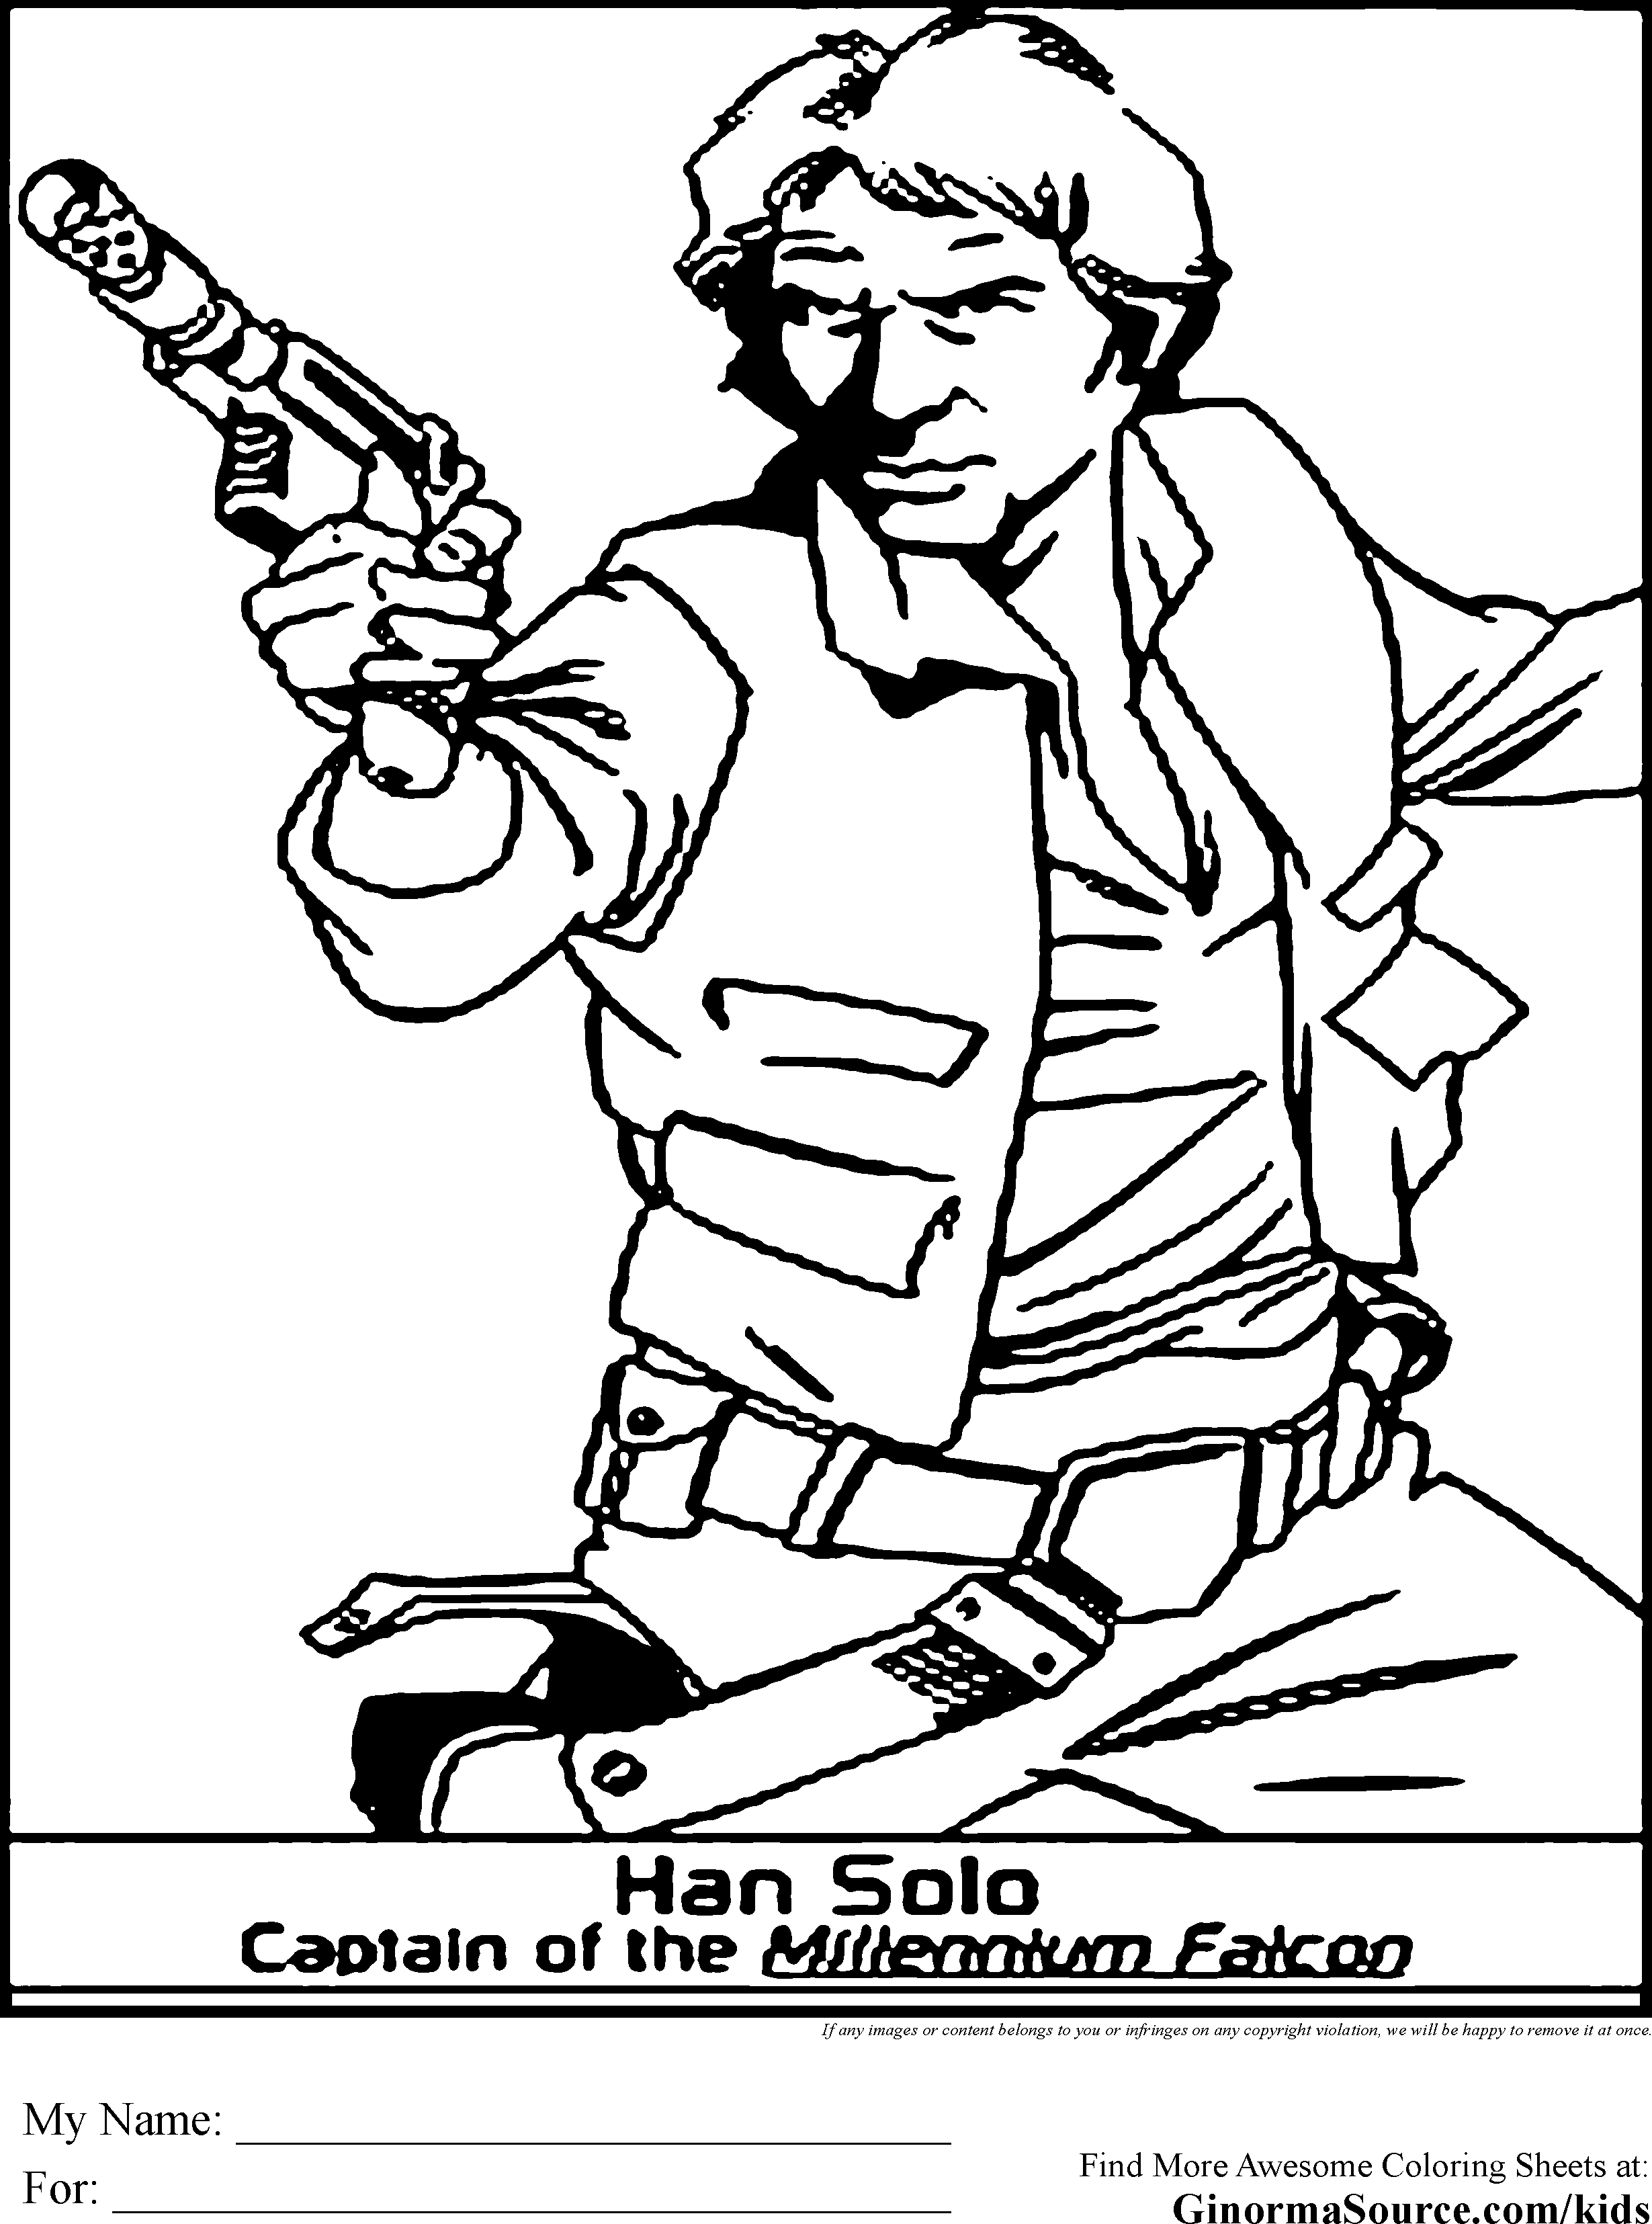 12 Pics of Han Solo Star Wars LEGO Coloring Pages Star Wars Han